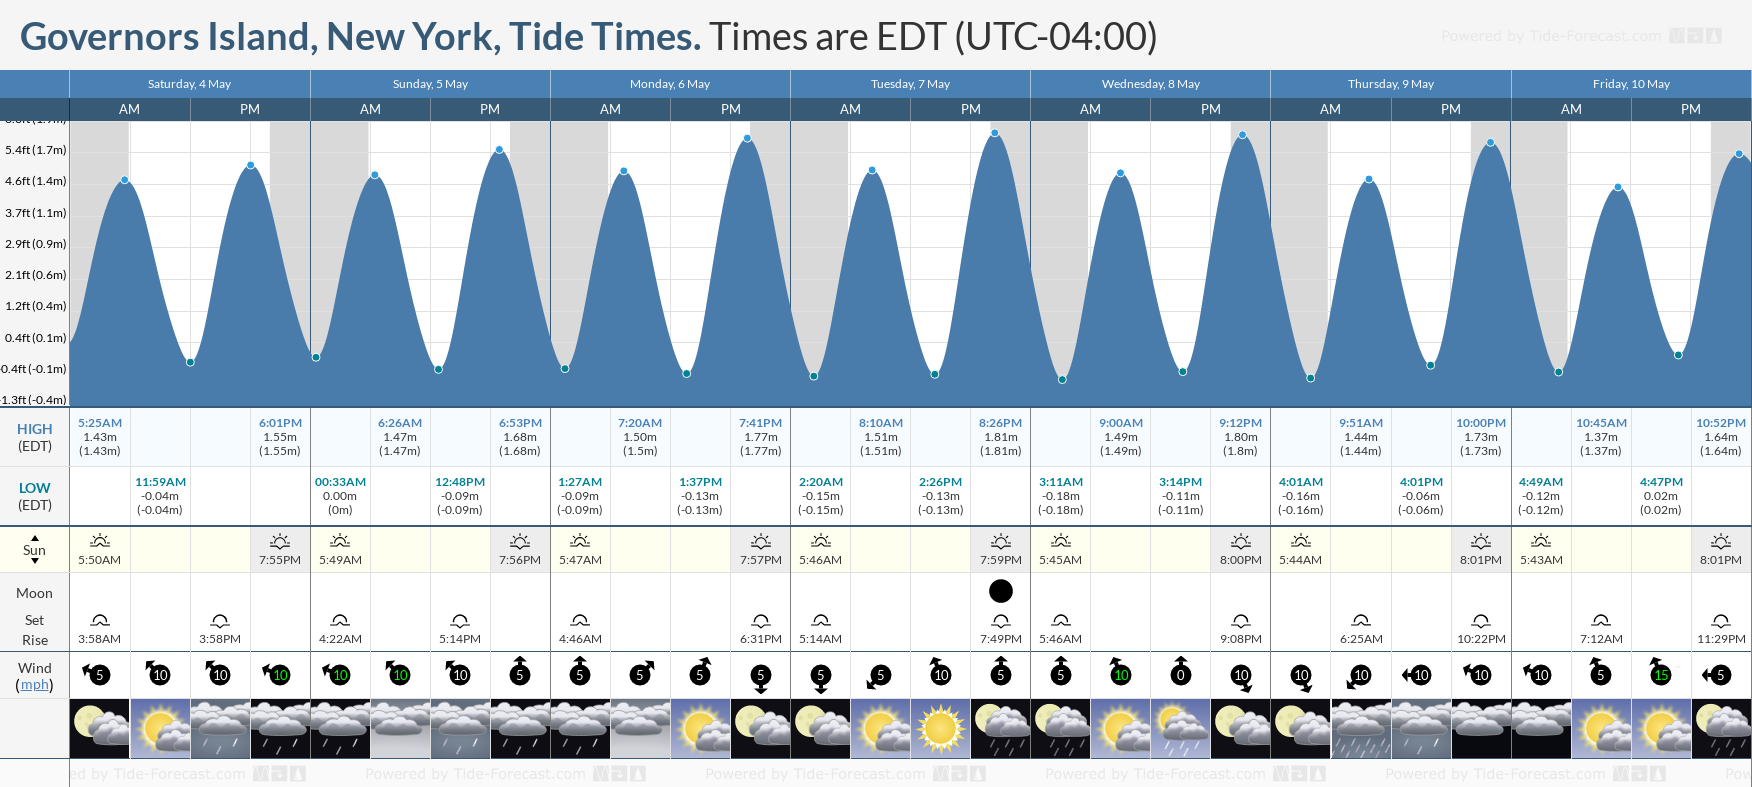 Governors Island, New York Tide Chart including high and low tide times for the next 7 days